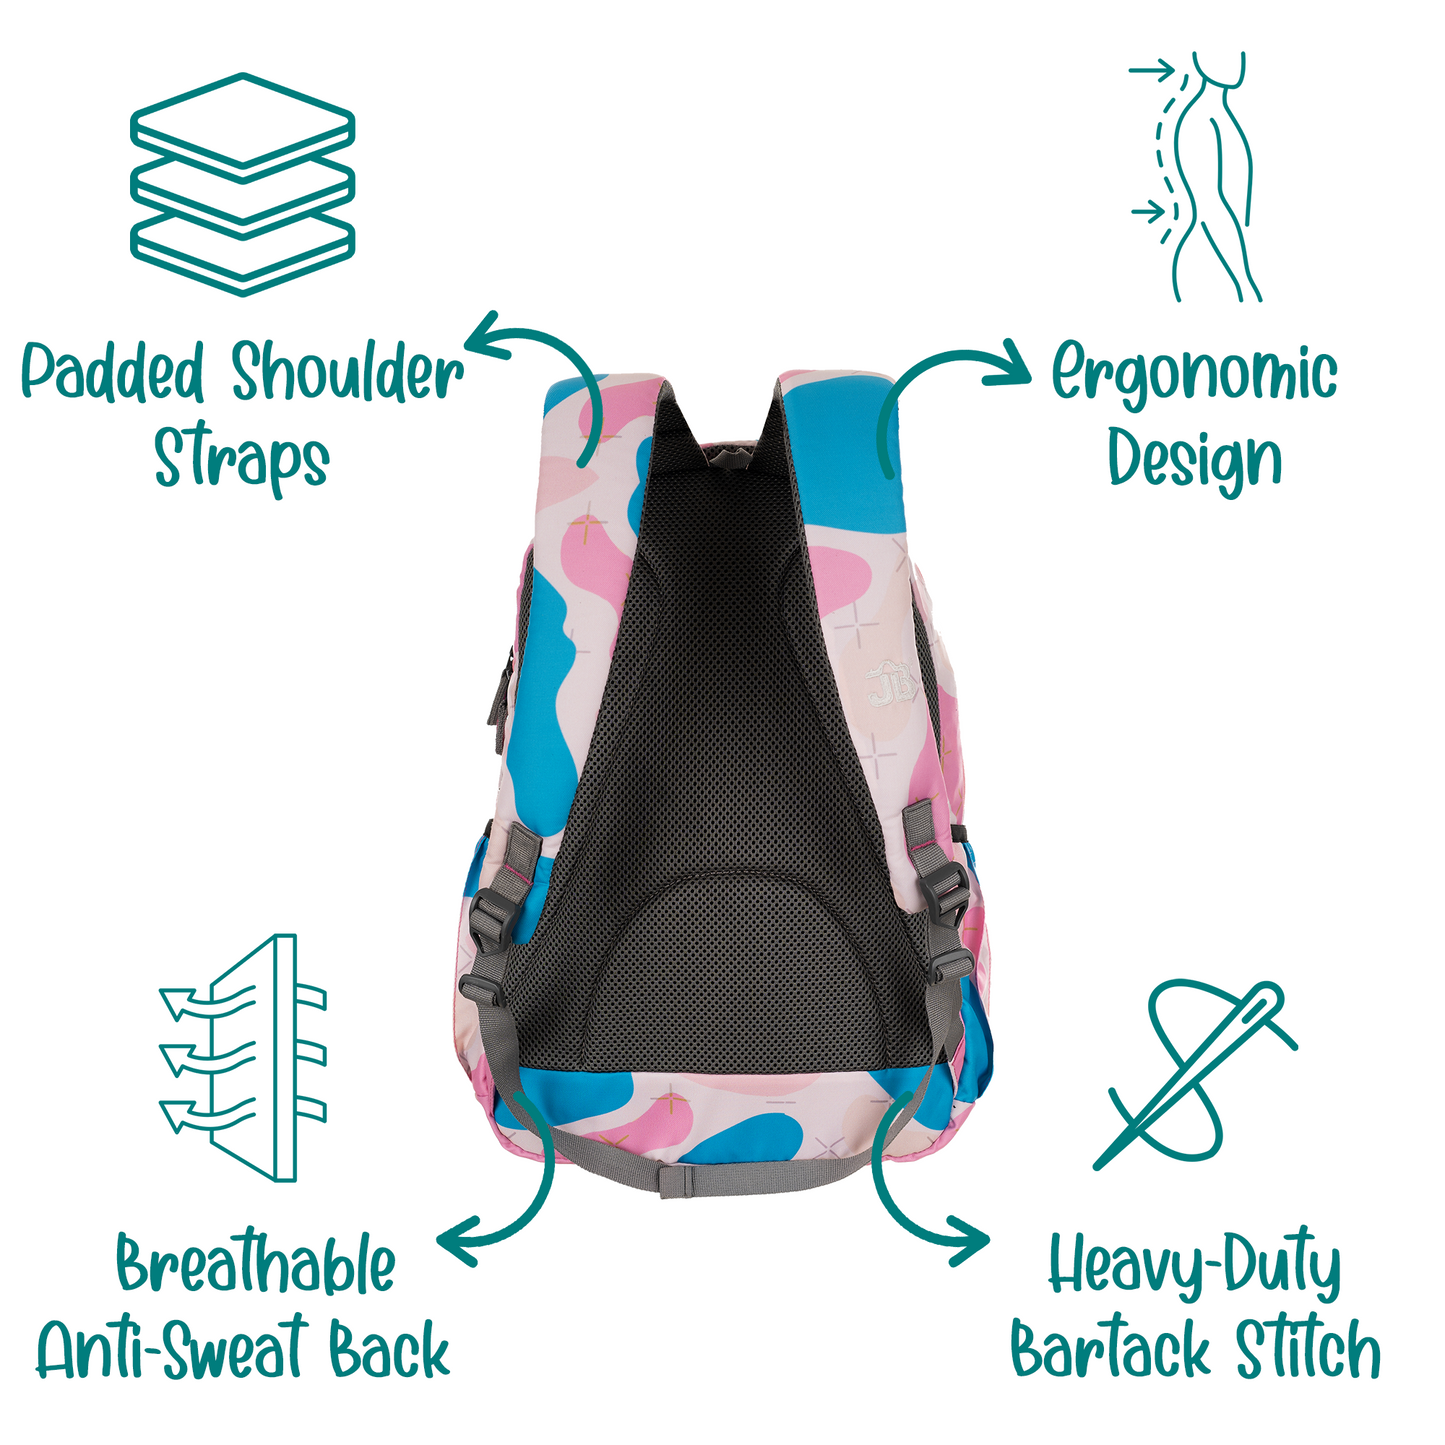 Sky Blossom School Backpack - 17 Inch (Pink-Blue)